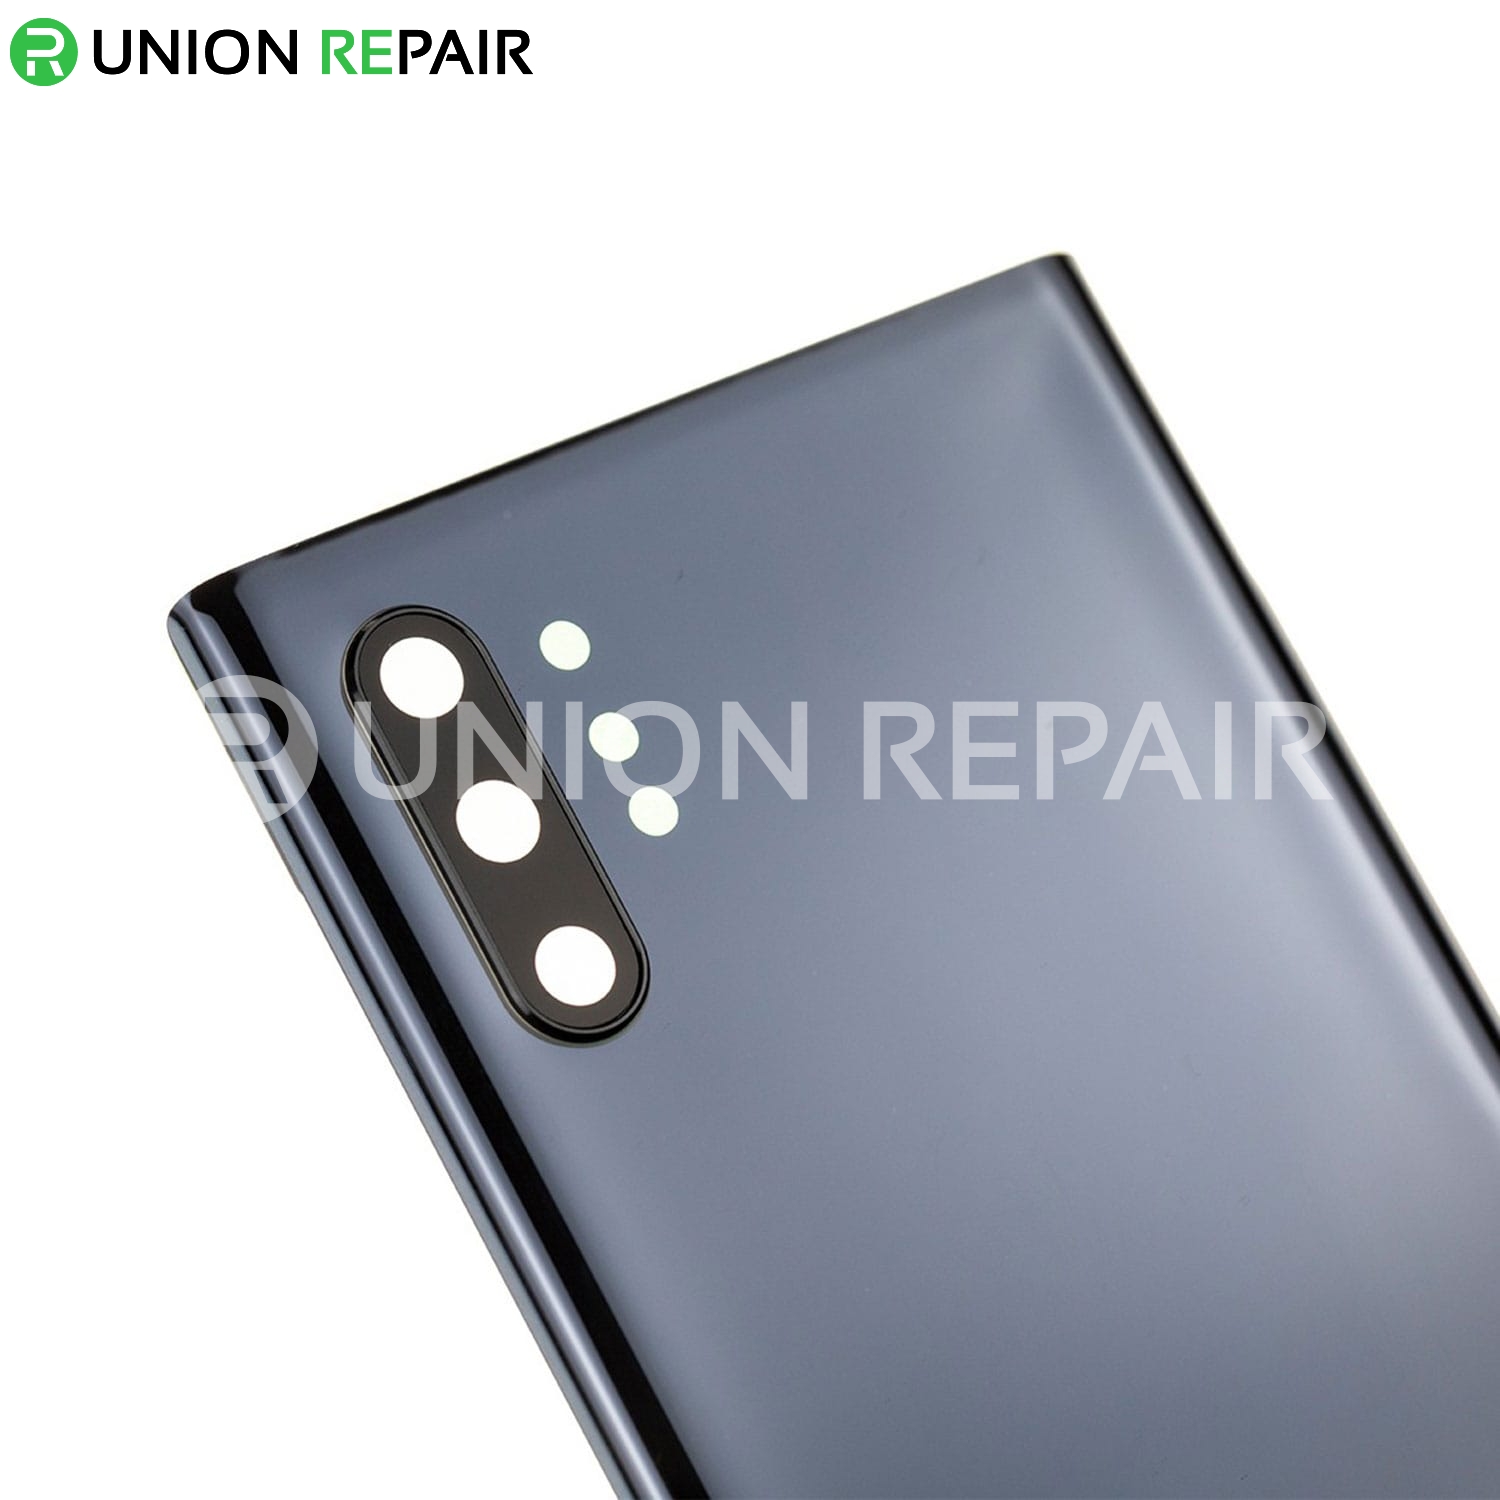 Replacement for Samsung Galaxy Note 10 Plus Battery Door - Blue